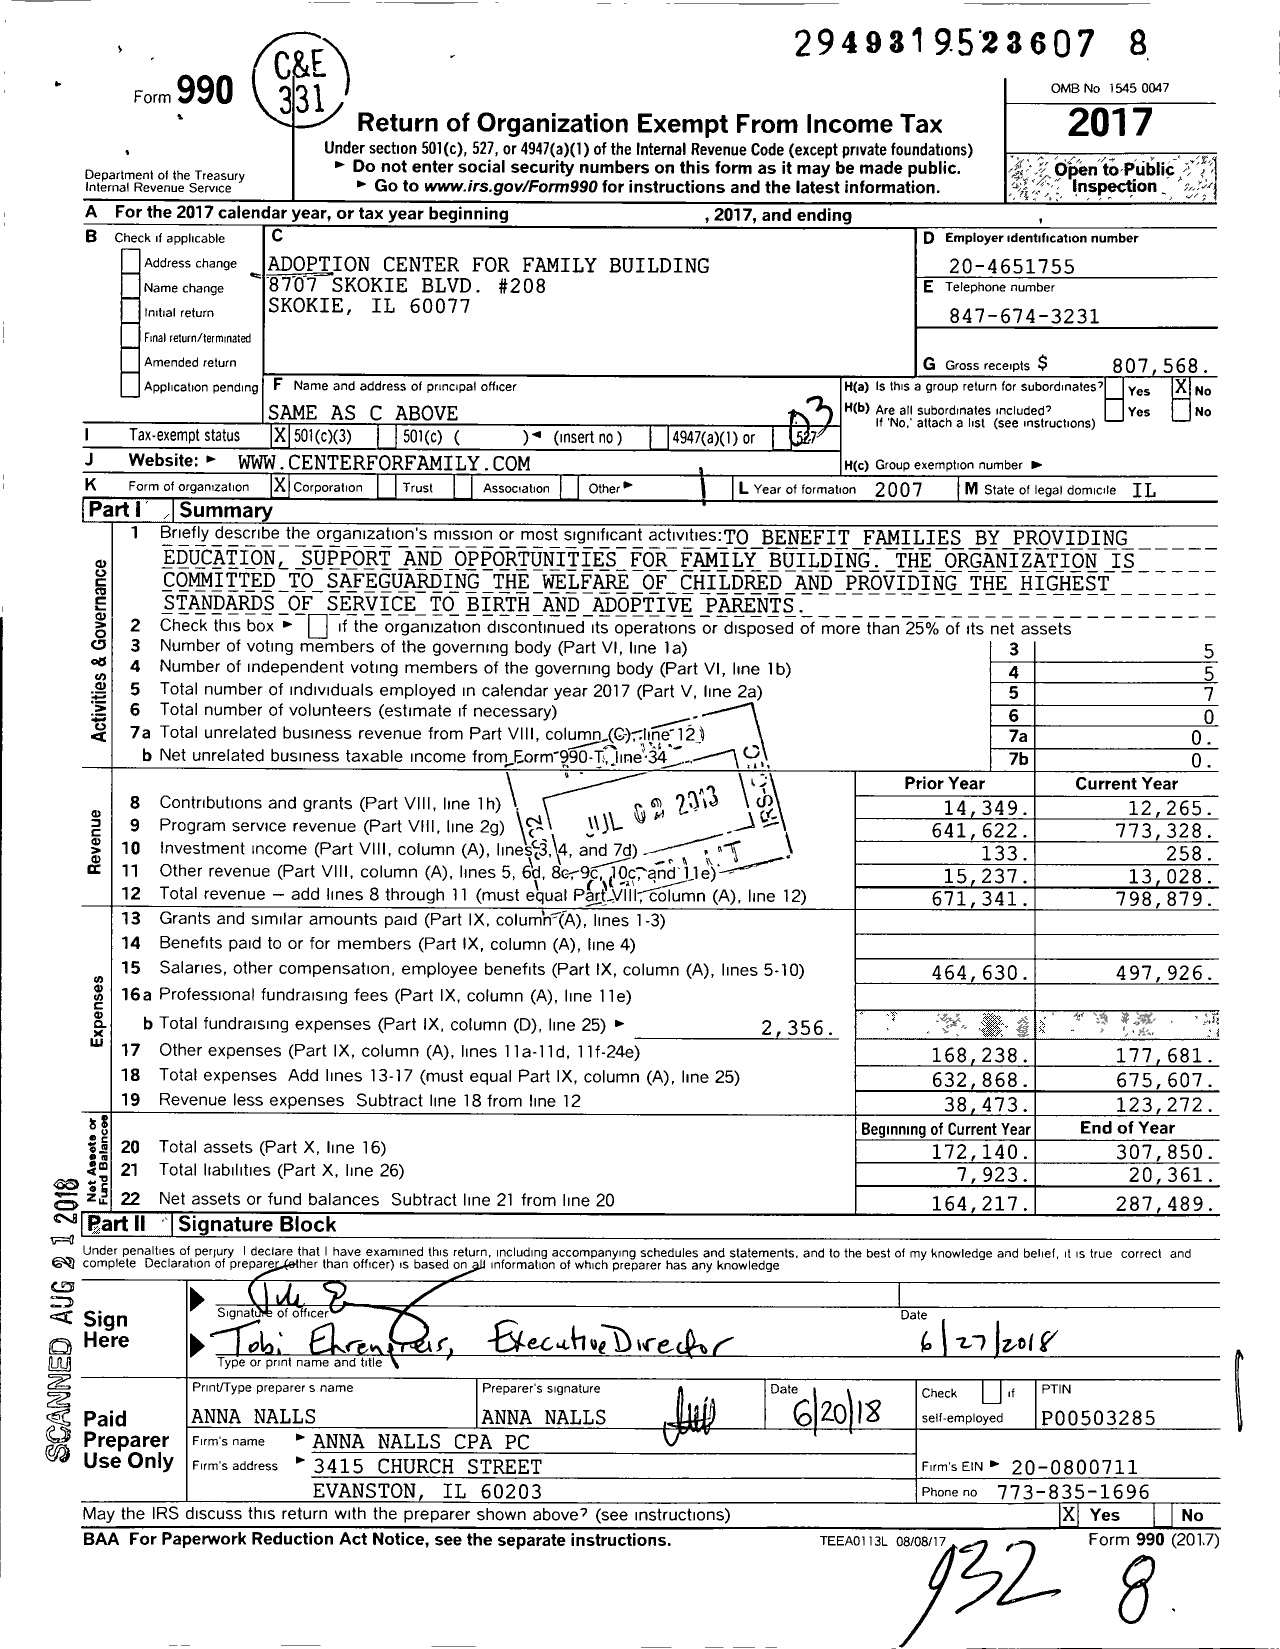 Image of first page of 2017 Form 990 for Adoption Center for Family Building